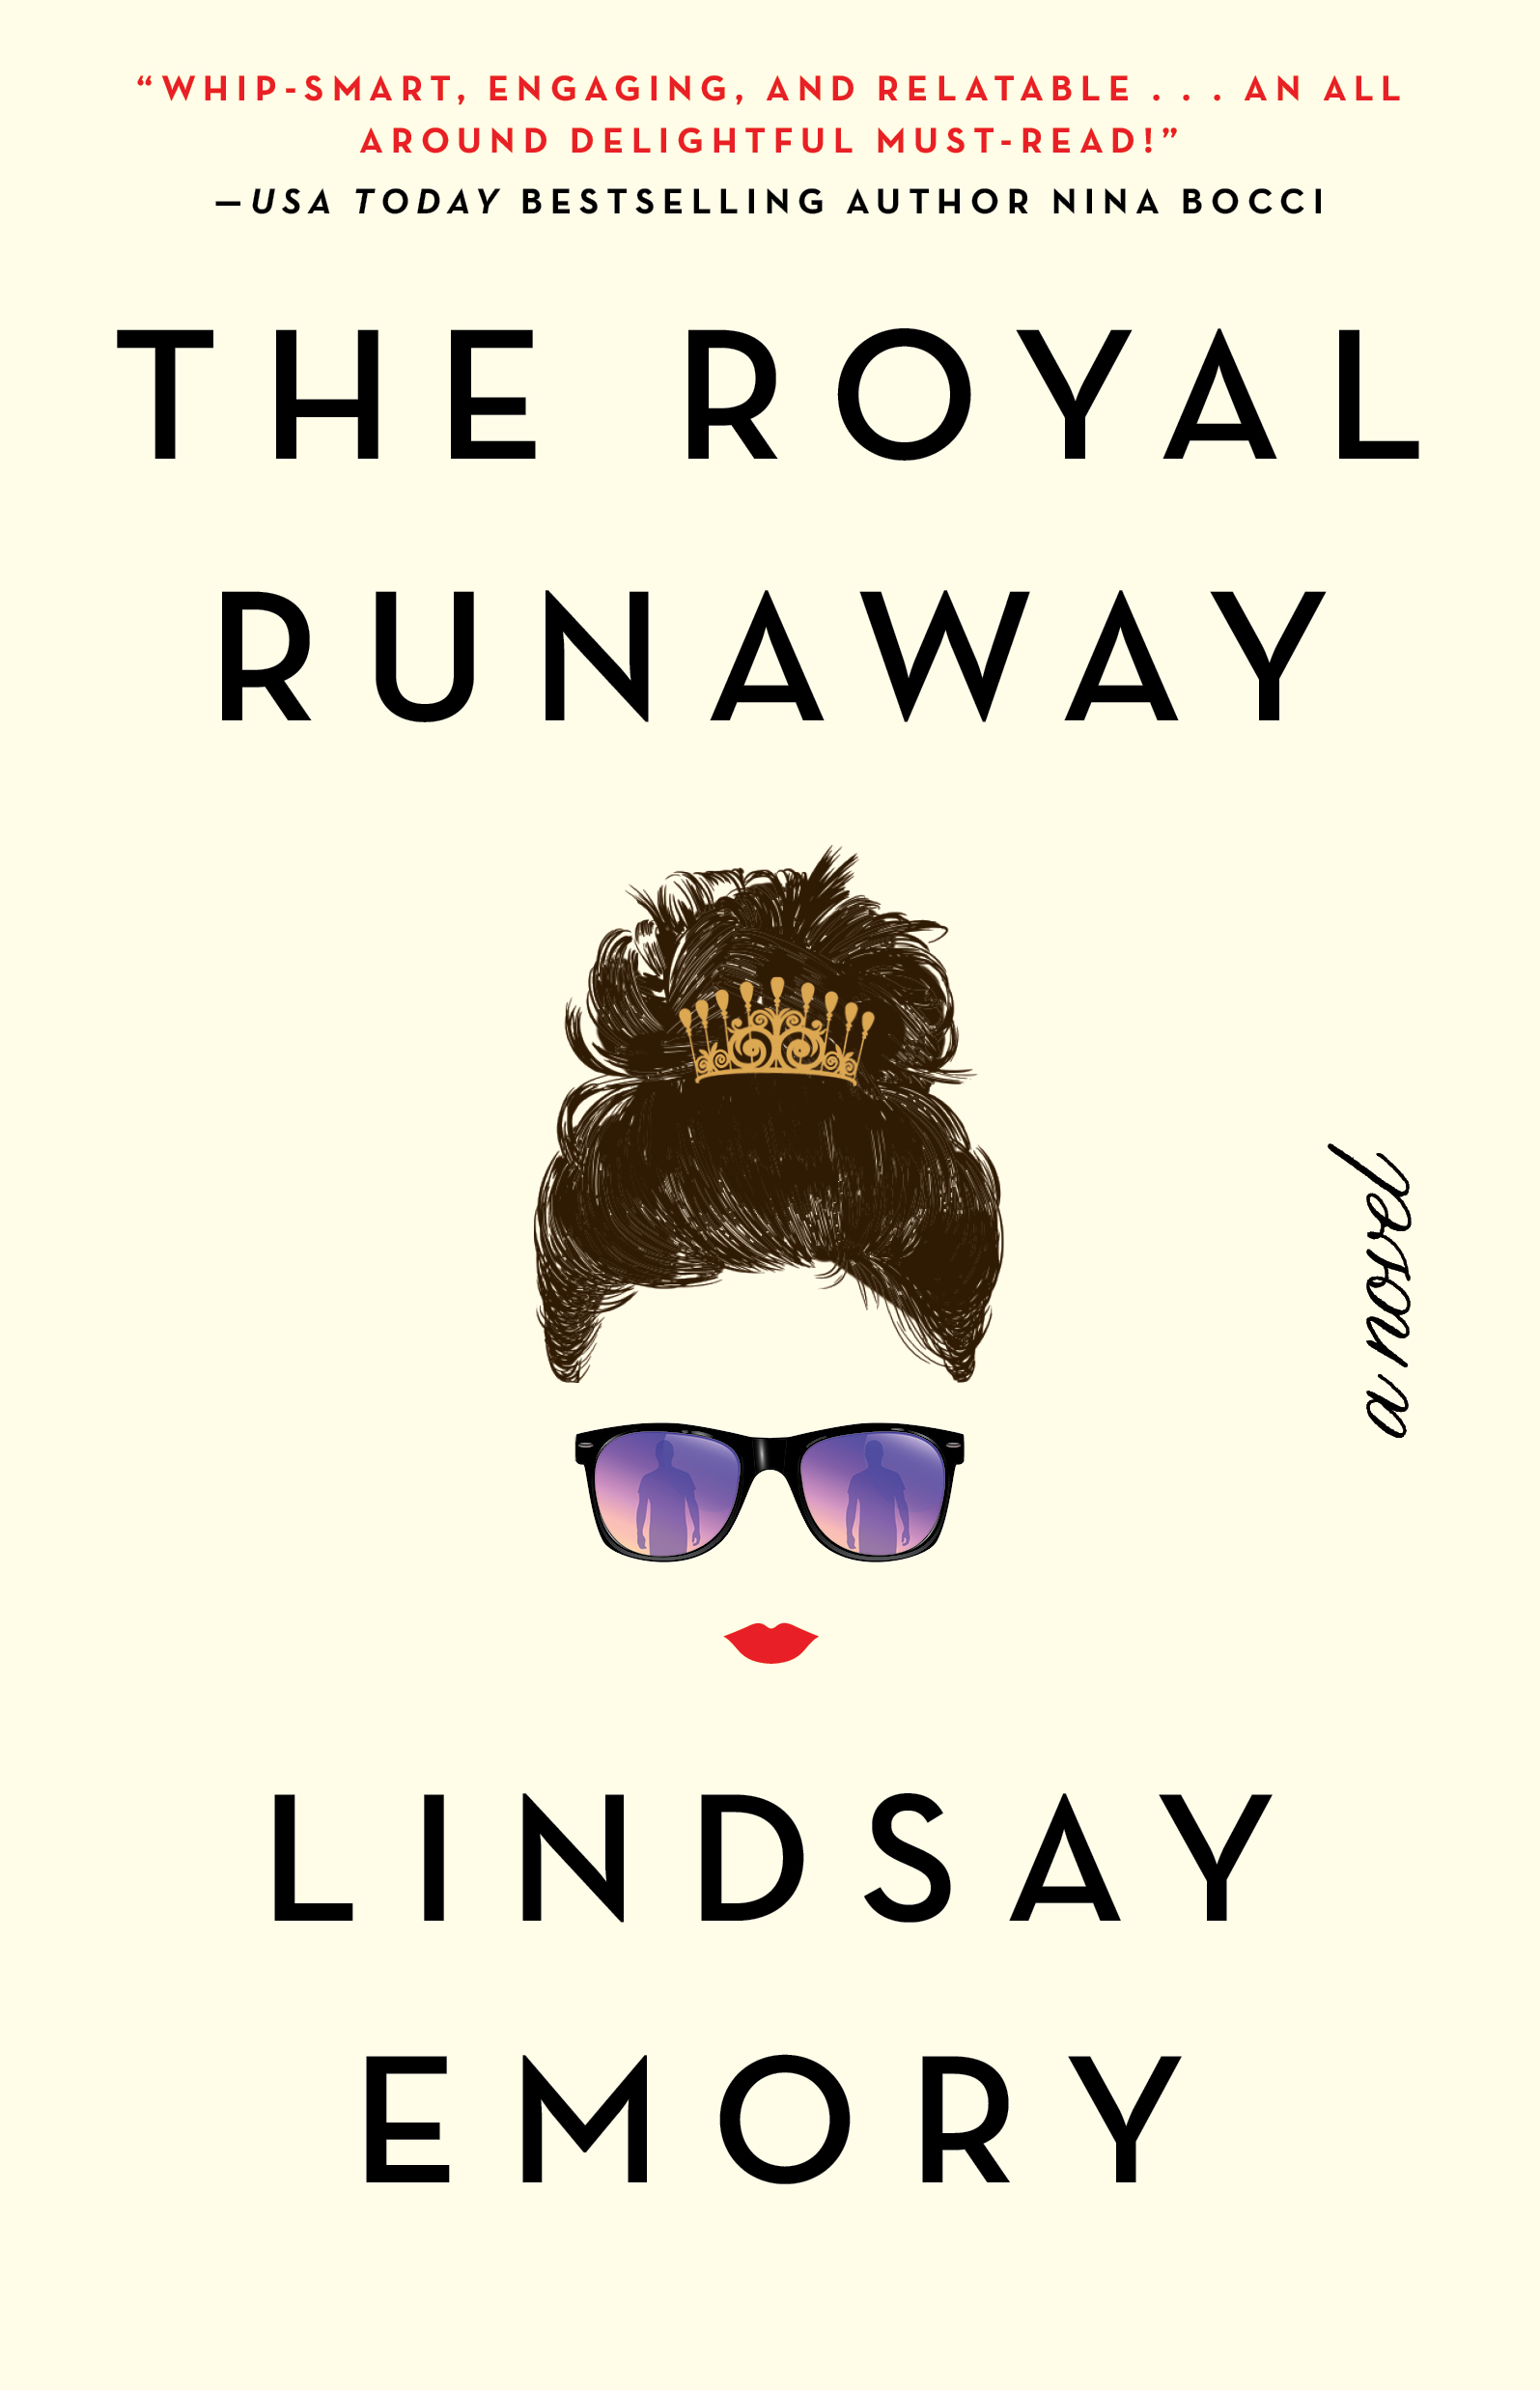 The Royal Runaway by Lindsay Emory Blog Tour Review